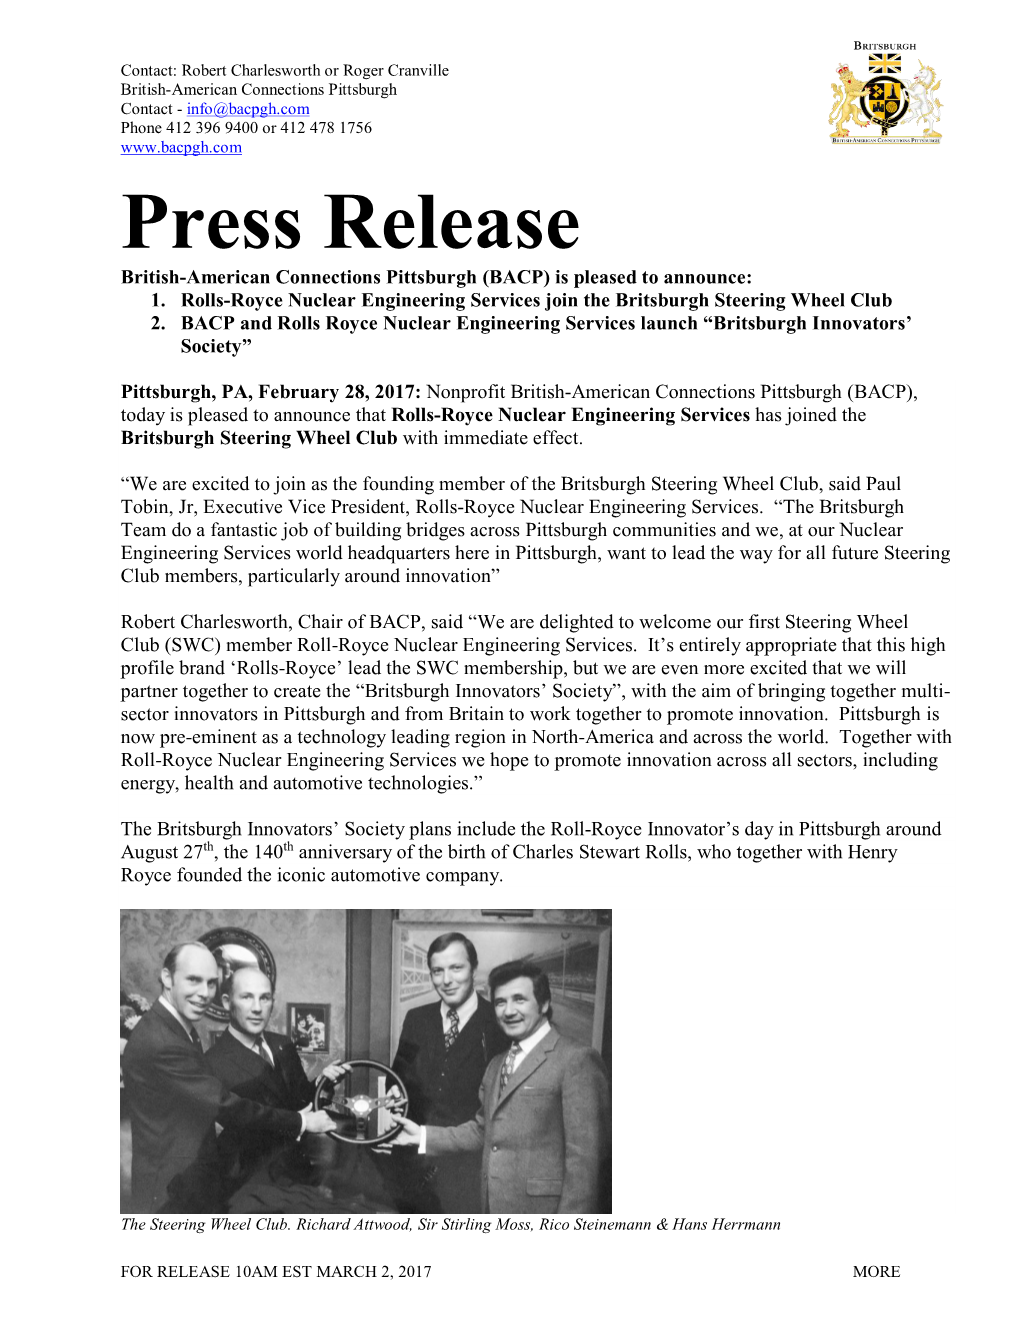 Press Release British-American Connections Pittsburgh (BACP) Is Pleased to Announce: 1